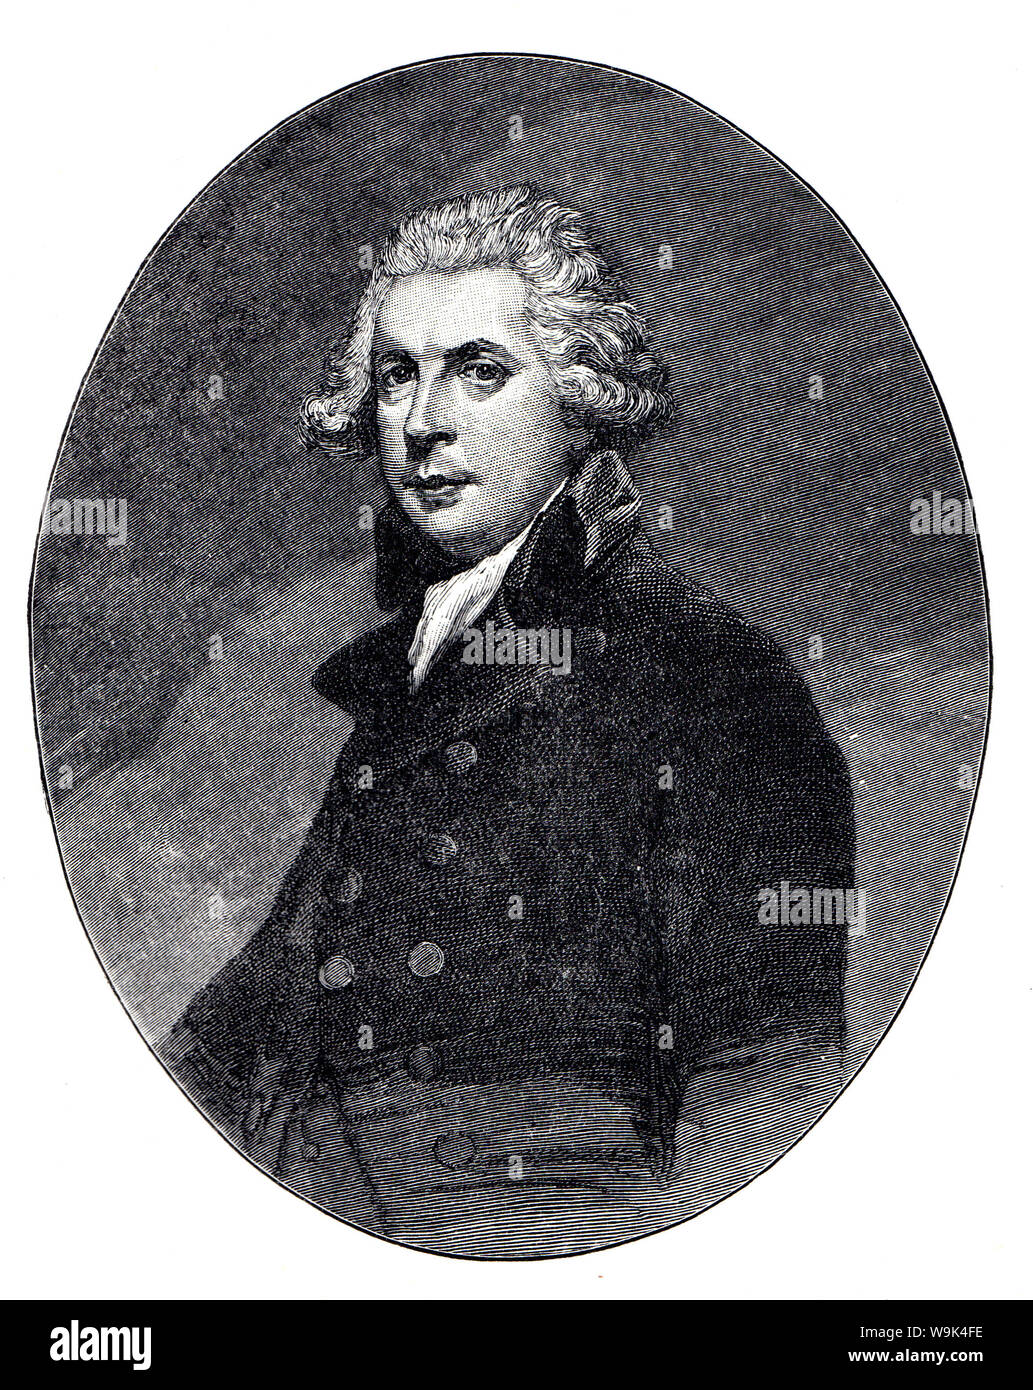 Portrait of Richard Brinsley Sheridan, Irish satirist, a playwright, poet, and long-term owner of the London Theatre Royal, Drury Lane. Black and Whit Stock Photo